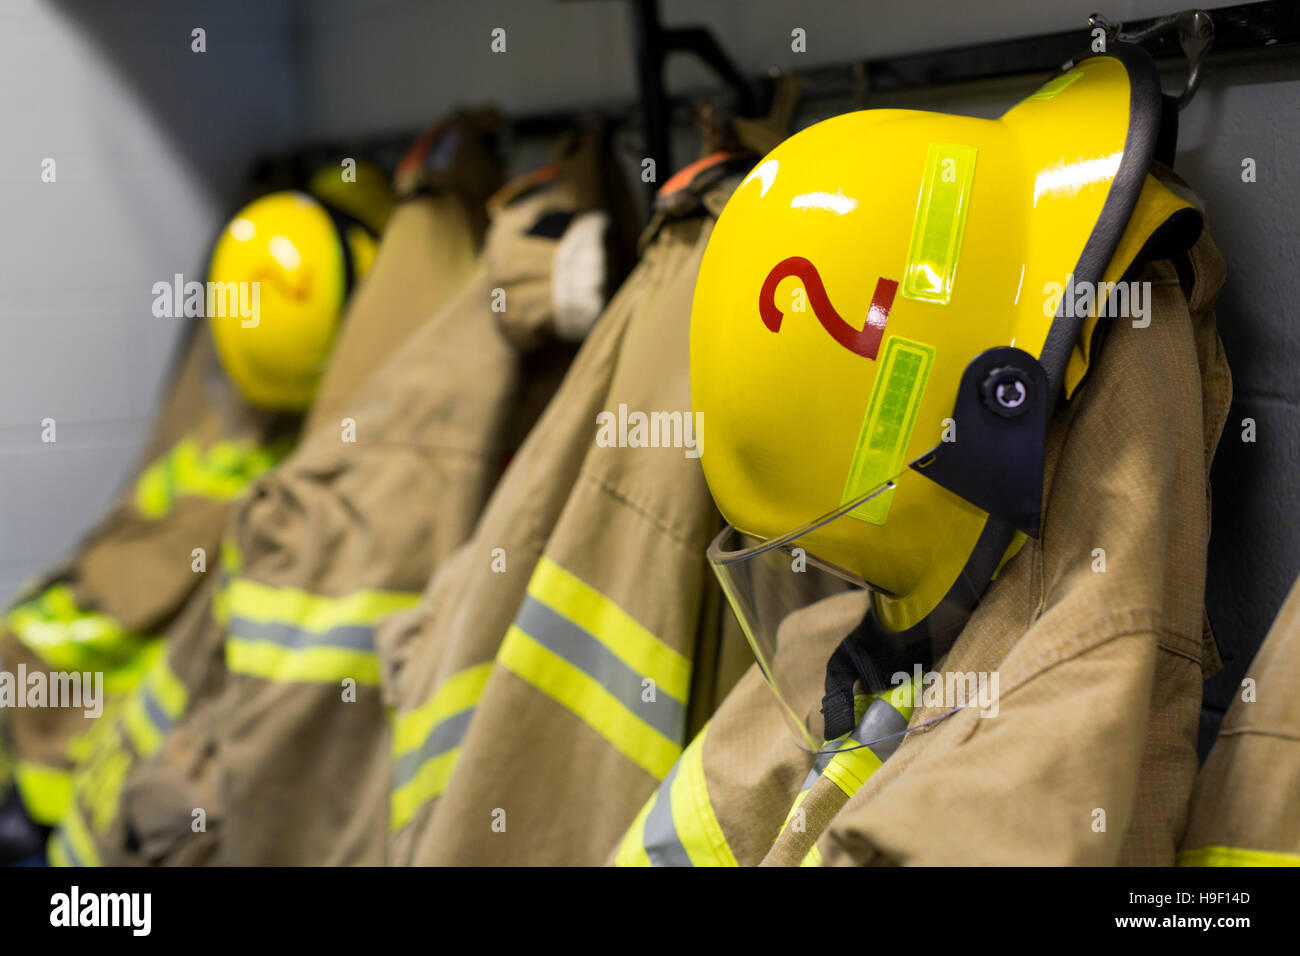 Coats and helmets of fire fighters hanging on hooks Stock Photo